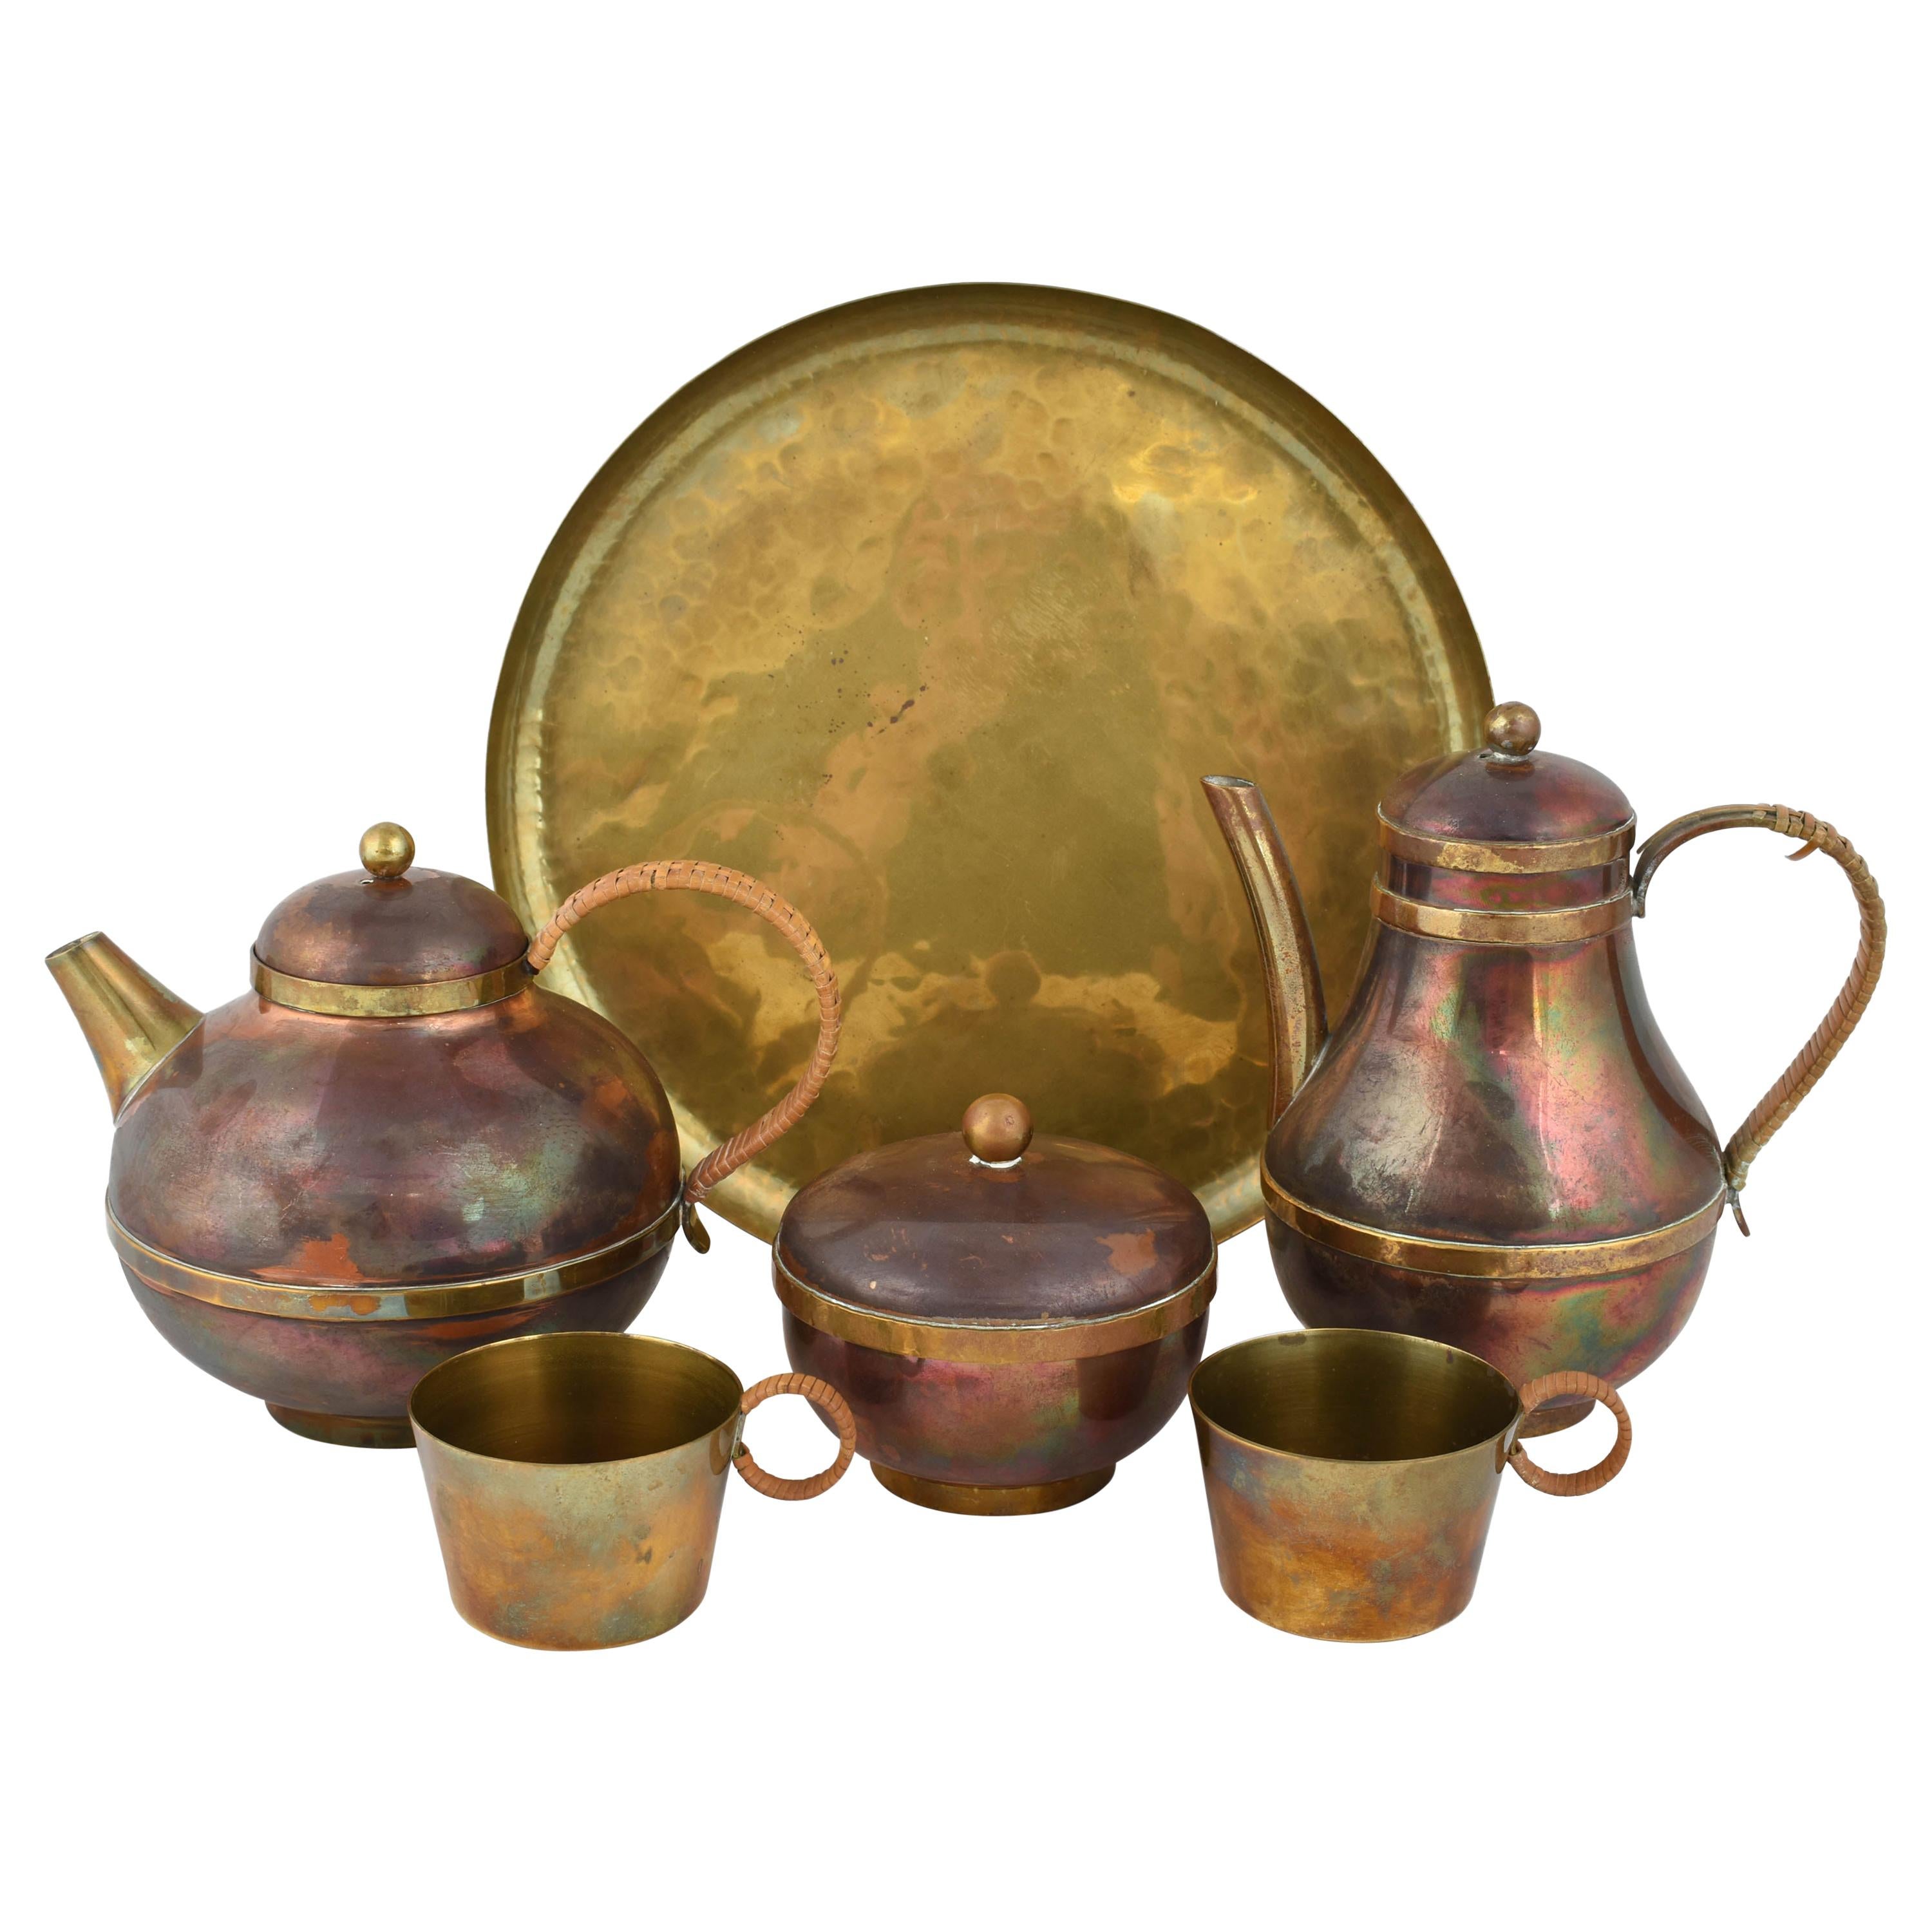 Vintage Brass and Copper Centrepiece and Tea Set by Harald Buchrucker, 1950s For Sale